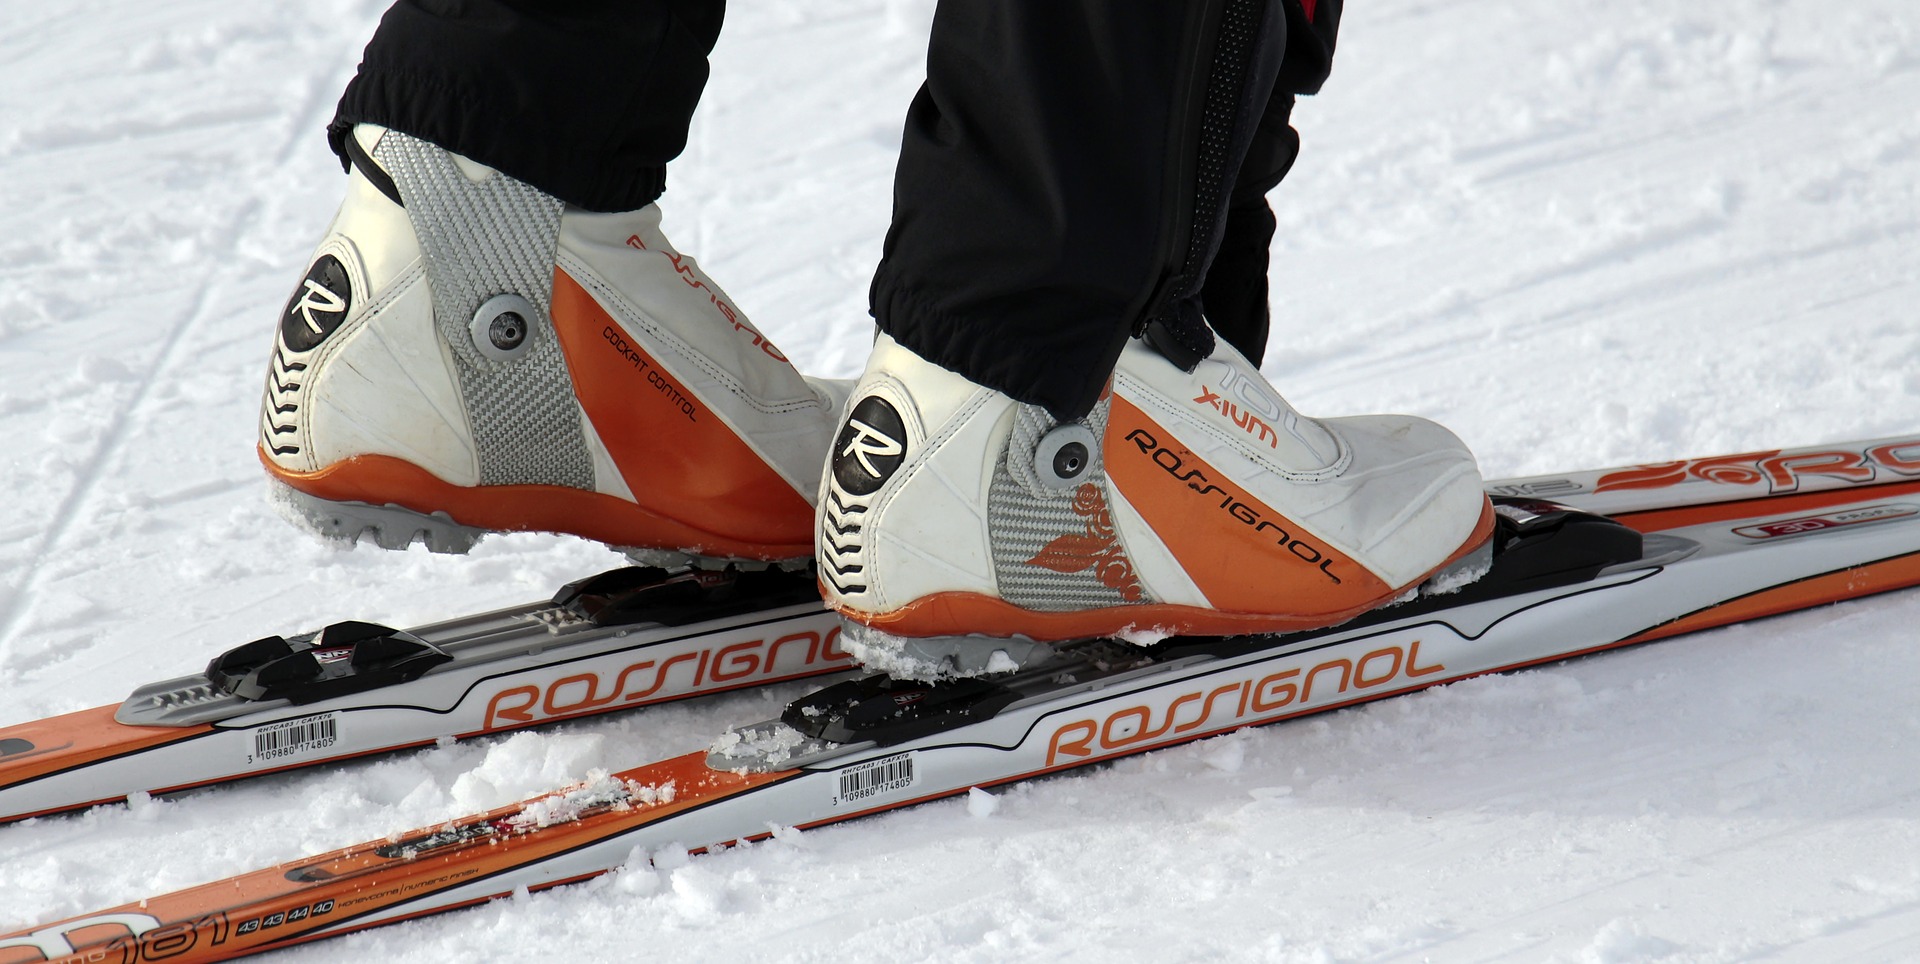 How Dangerous is Skiing for My Feet?